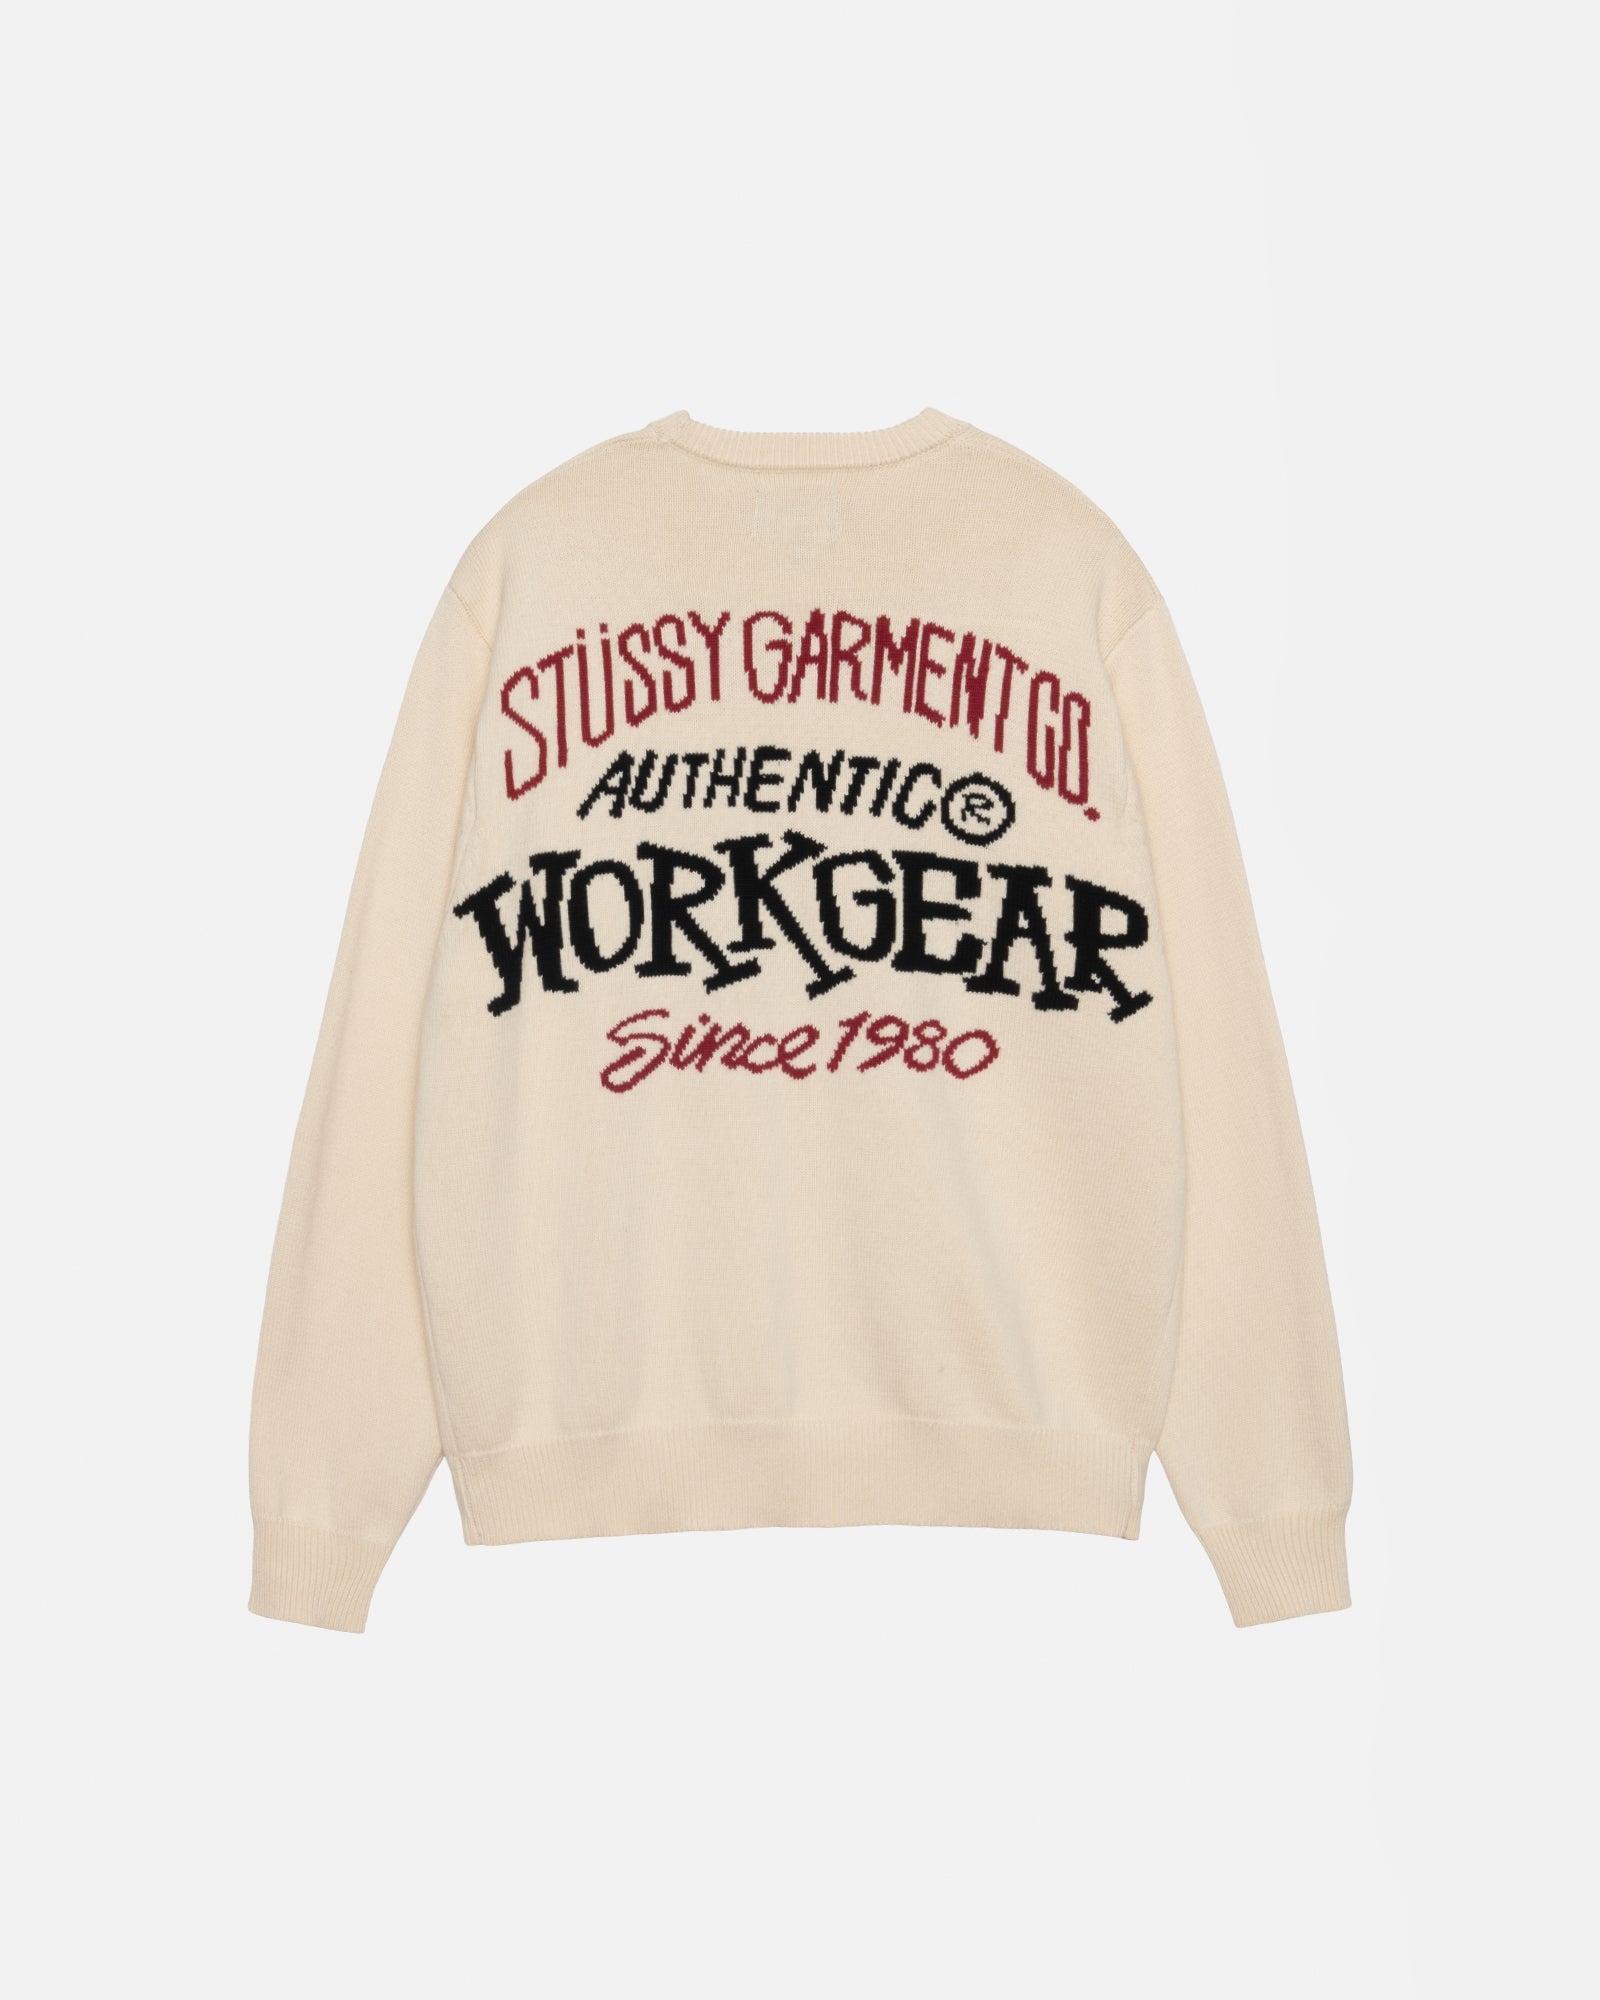 STUSSY AUTHENTIC WORKGEAR SWEATER L SIZE